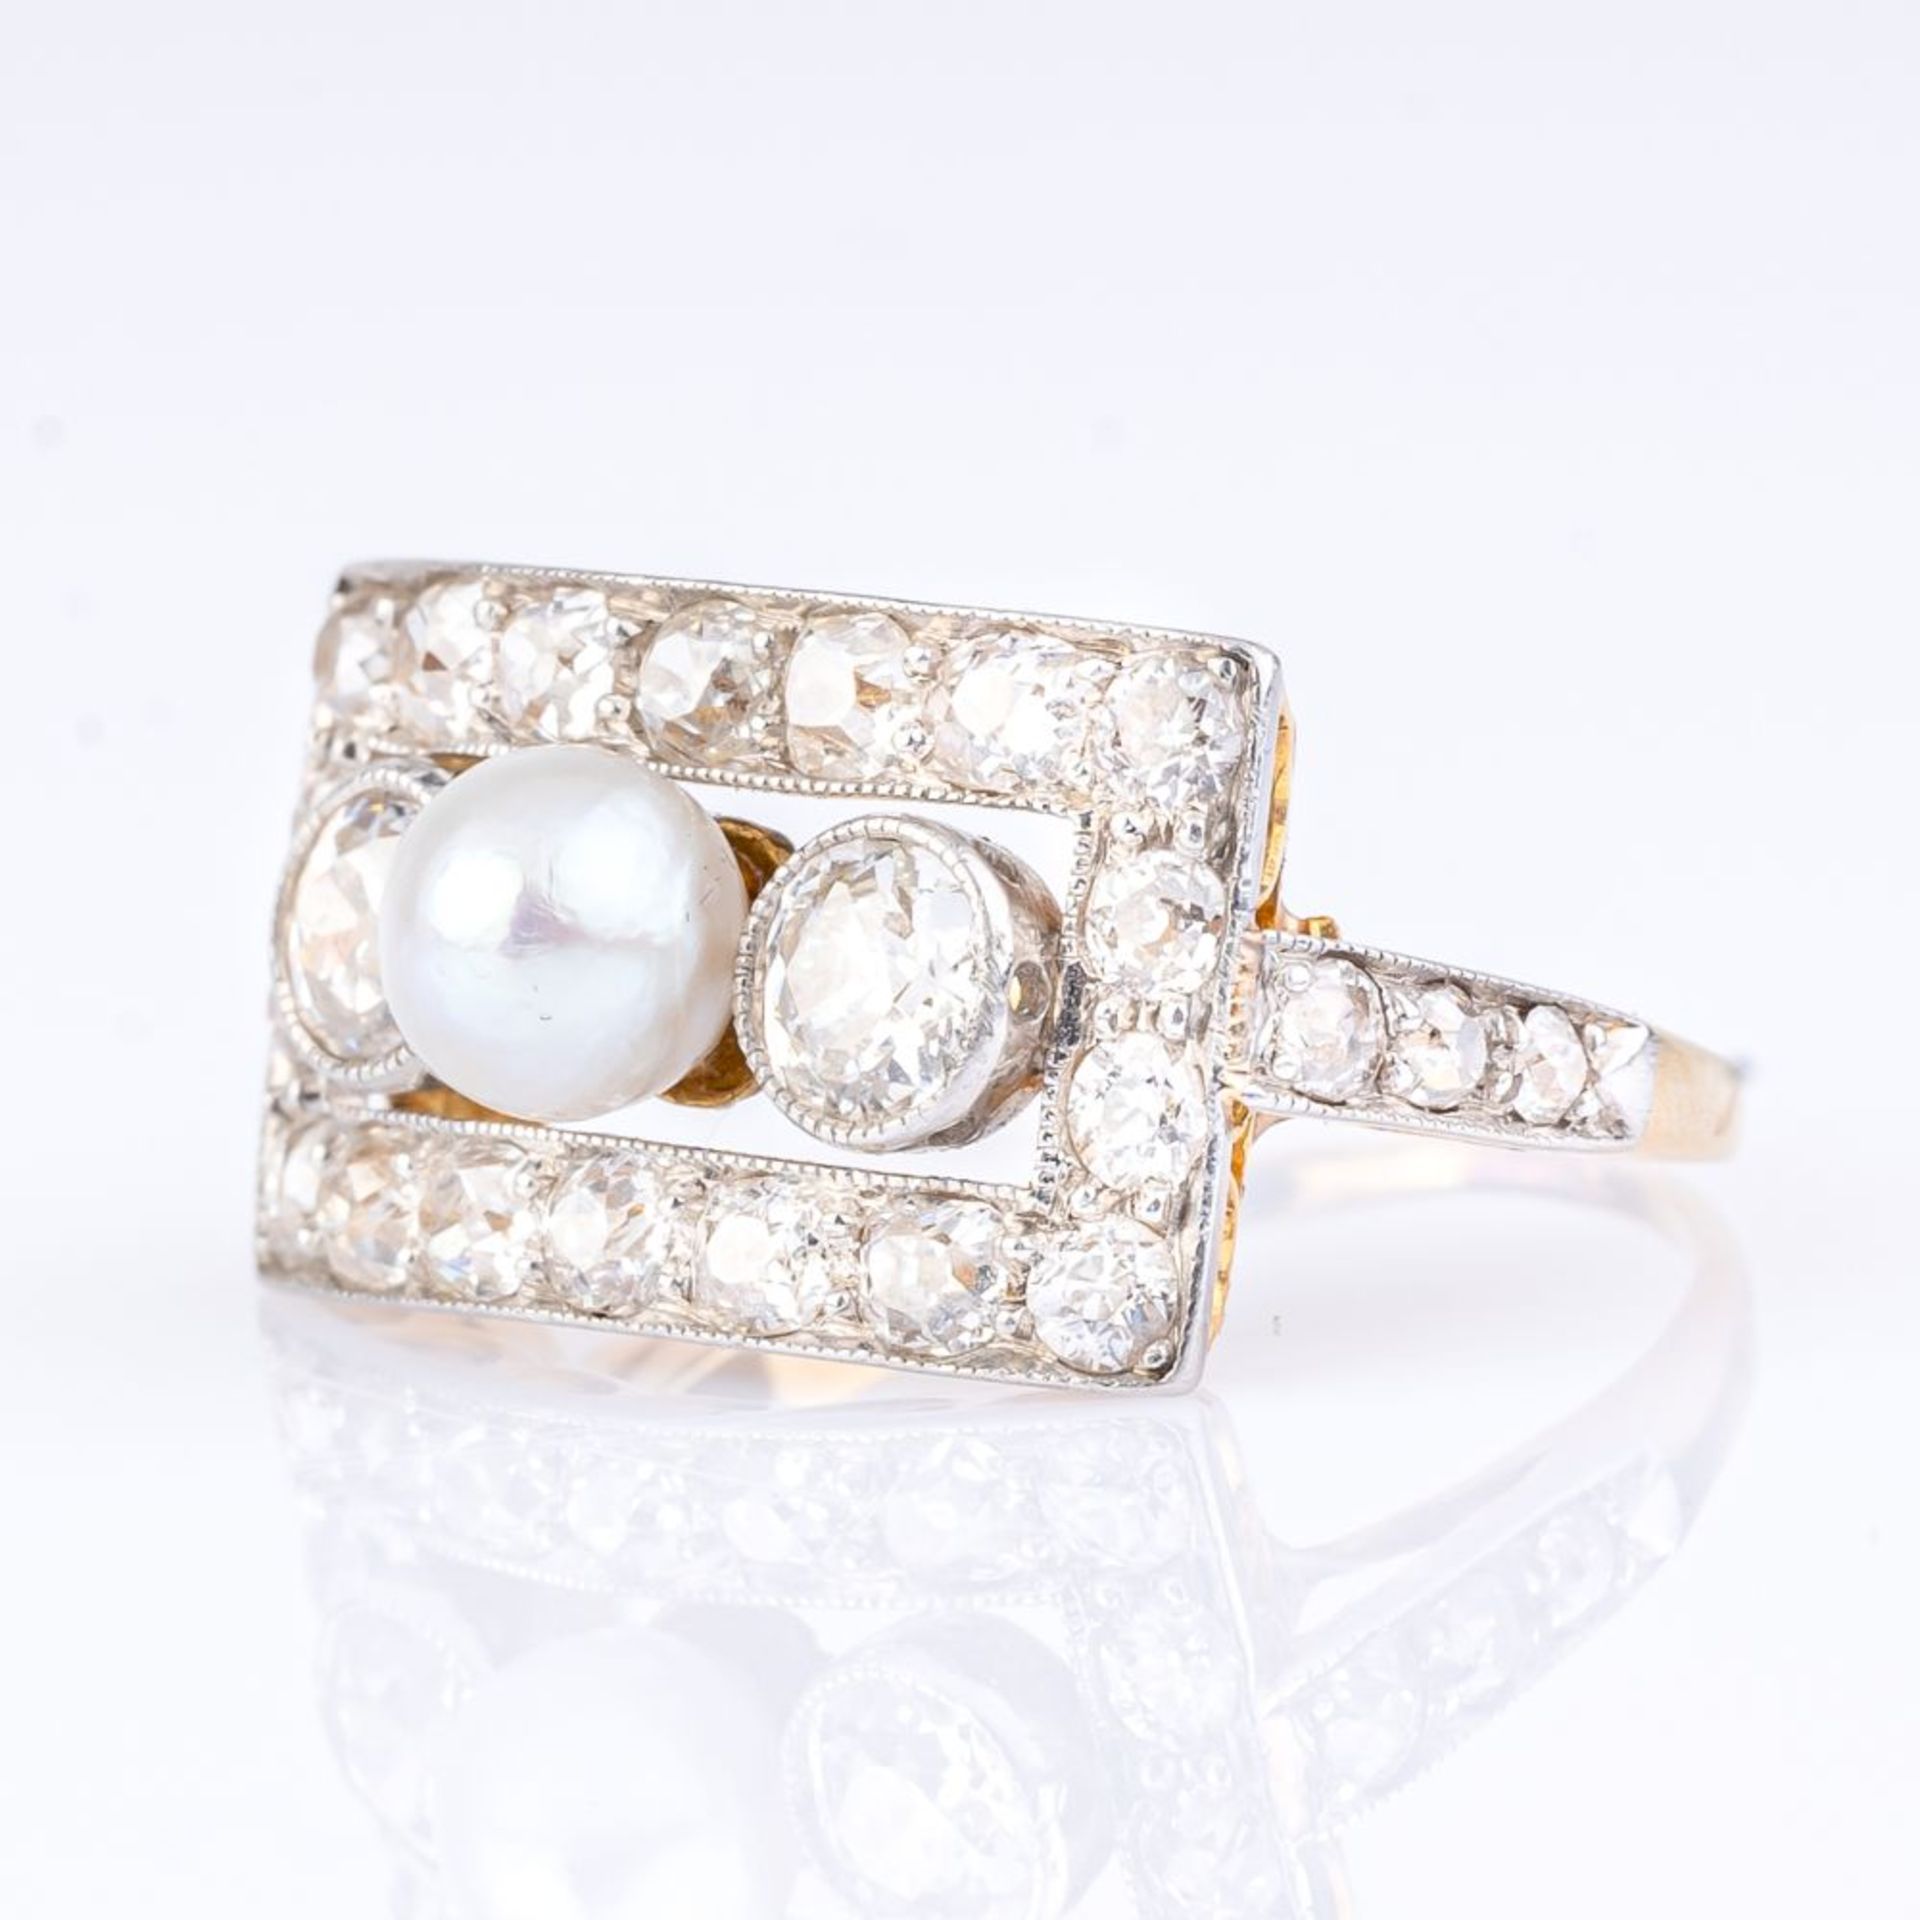 An Art-déco Old Cut Diamond Ring with Pearl.